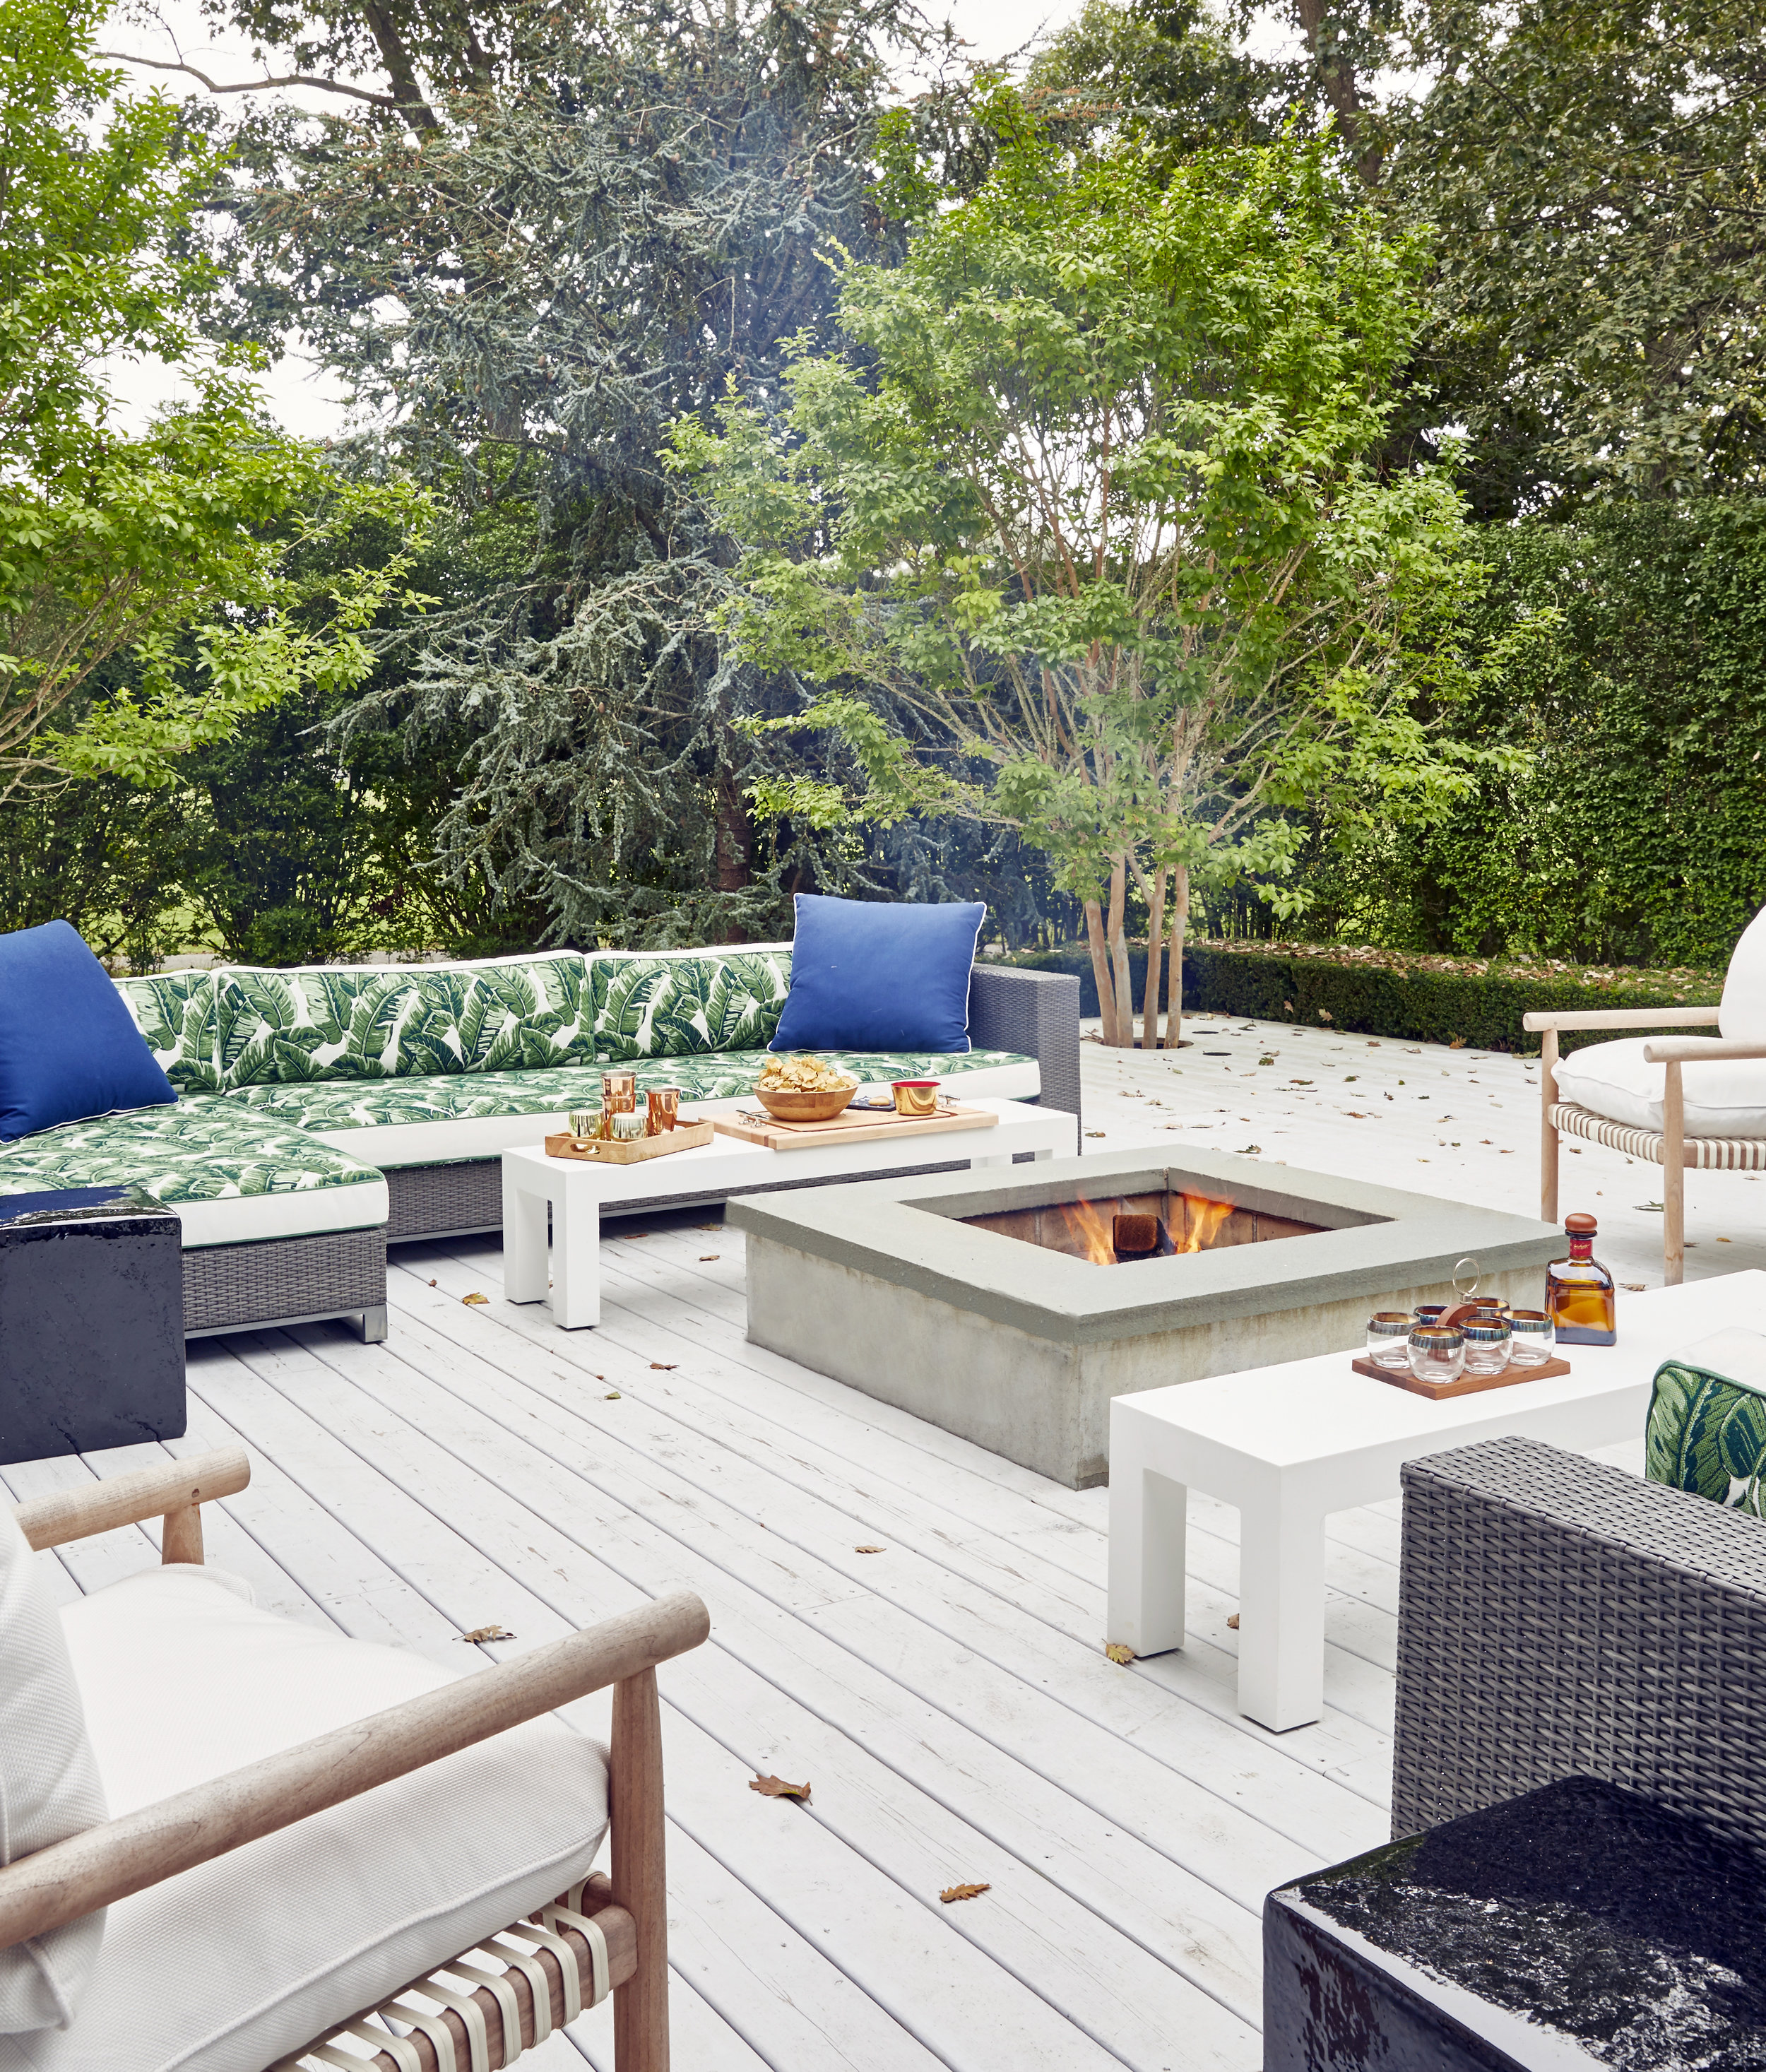 Sofas from Restoration hardware, armchairs &amp; dining chairs DEDON, rocking chairs Janus et cie, green leaf fabric Pierre Frey, Custom white corian tables designed by Aamir Khandwala, custom firepit